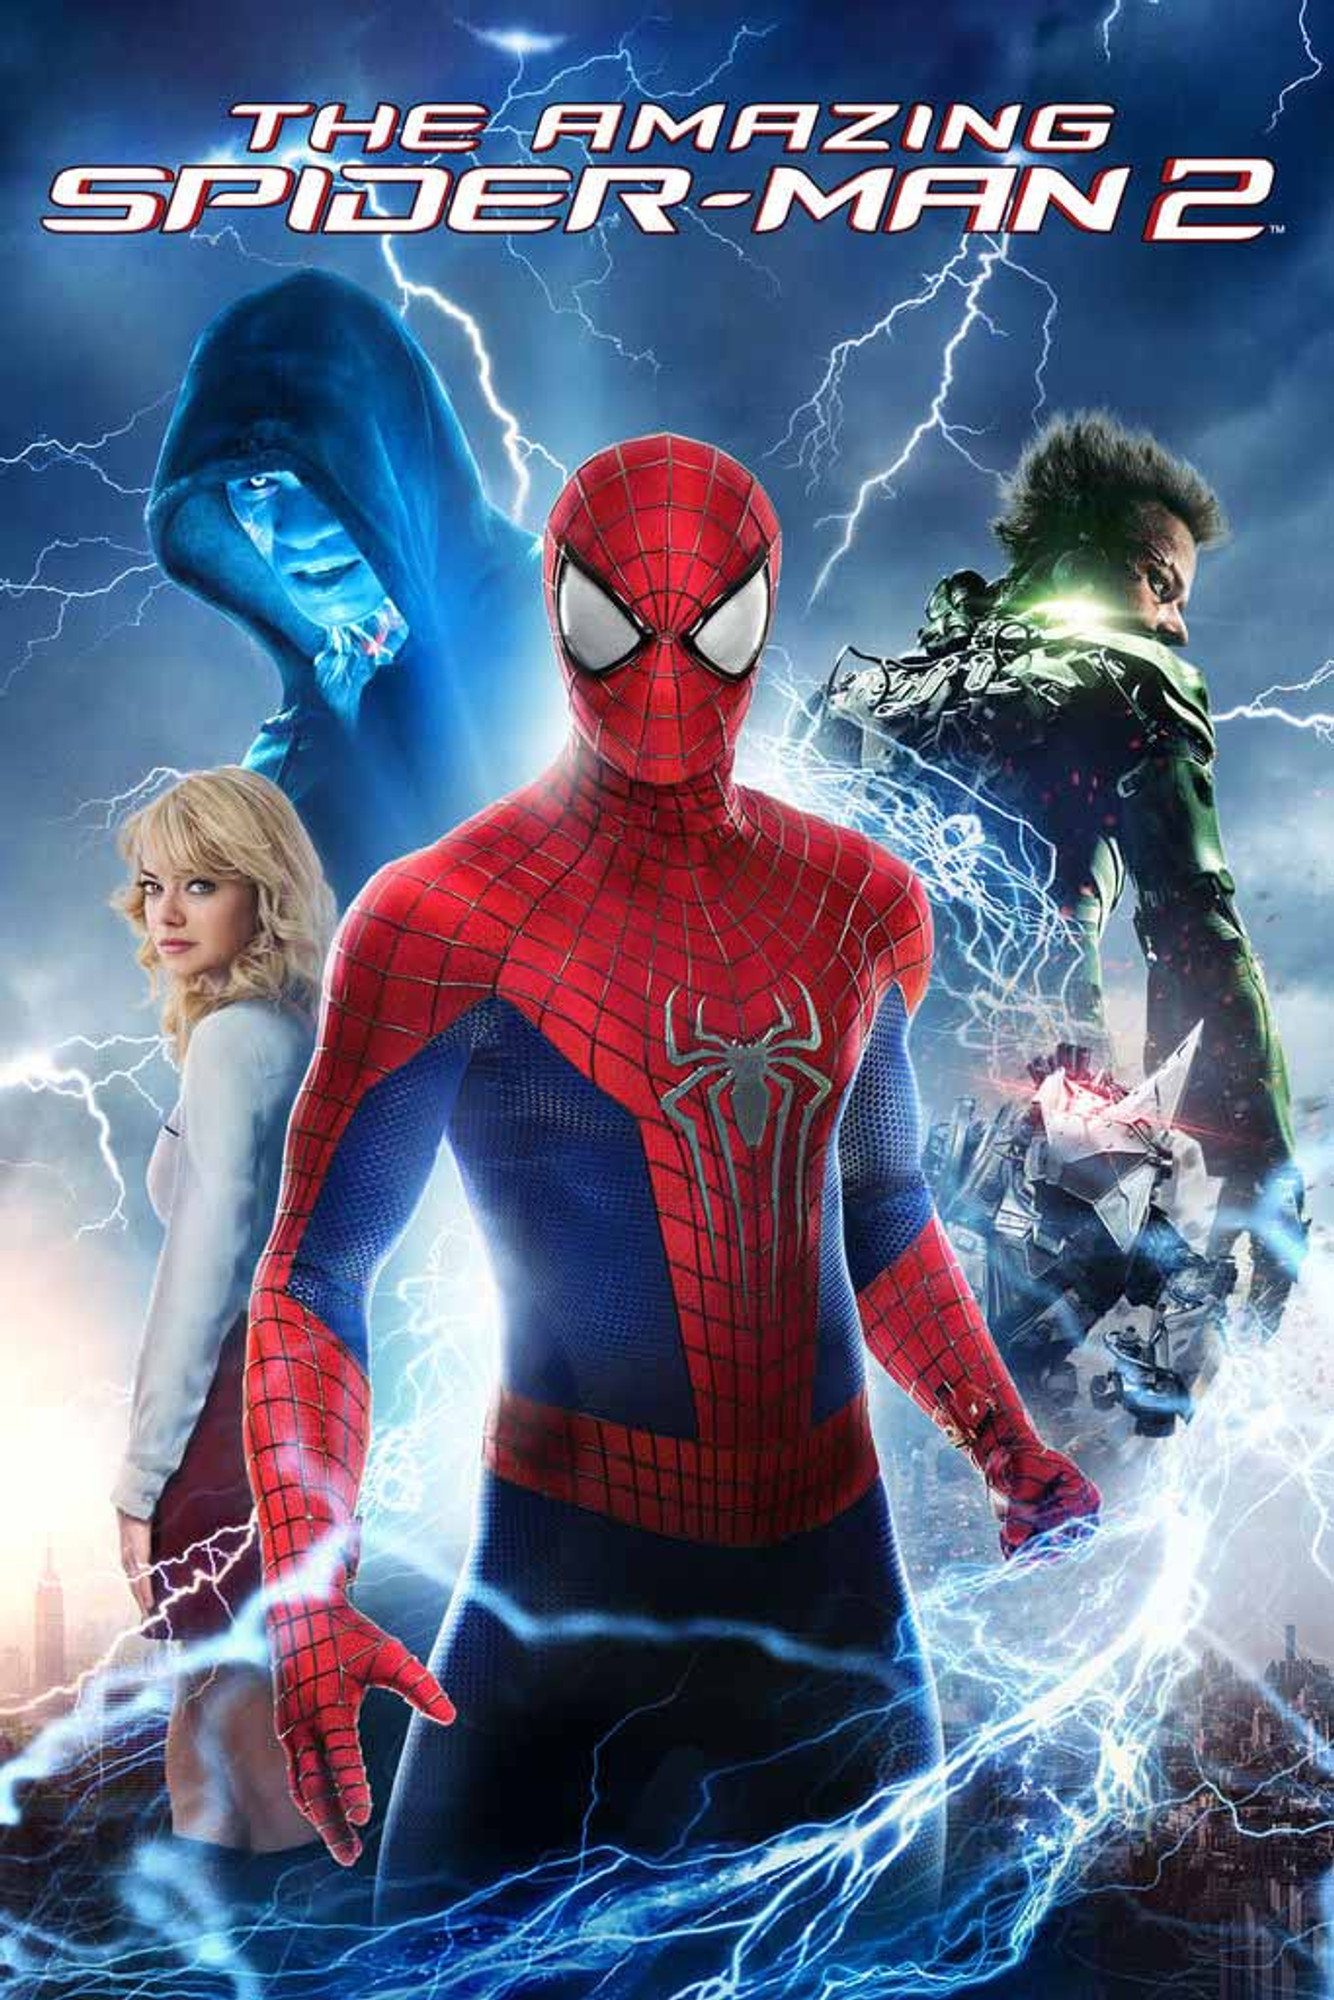 Spider-Man Collection on Movies Anywhere